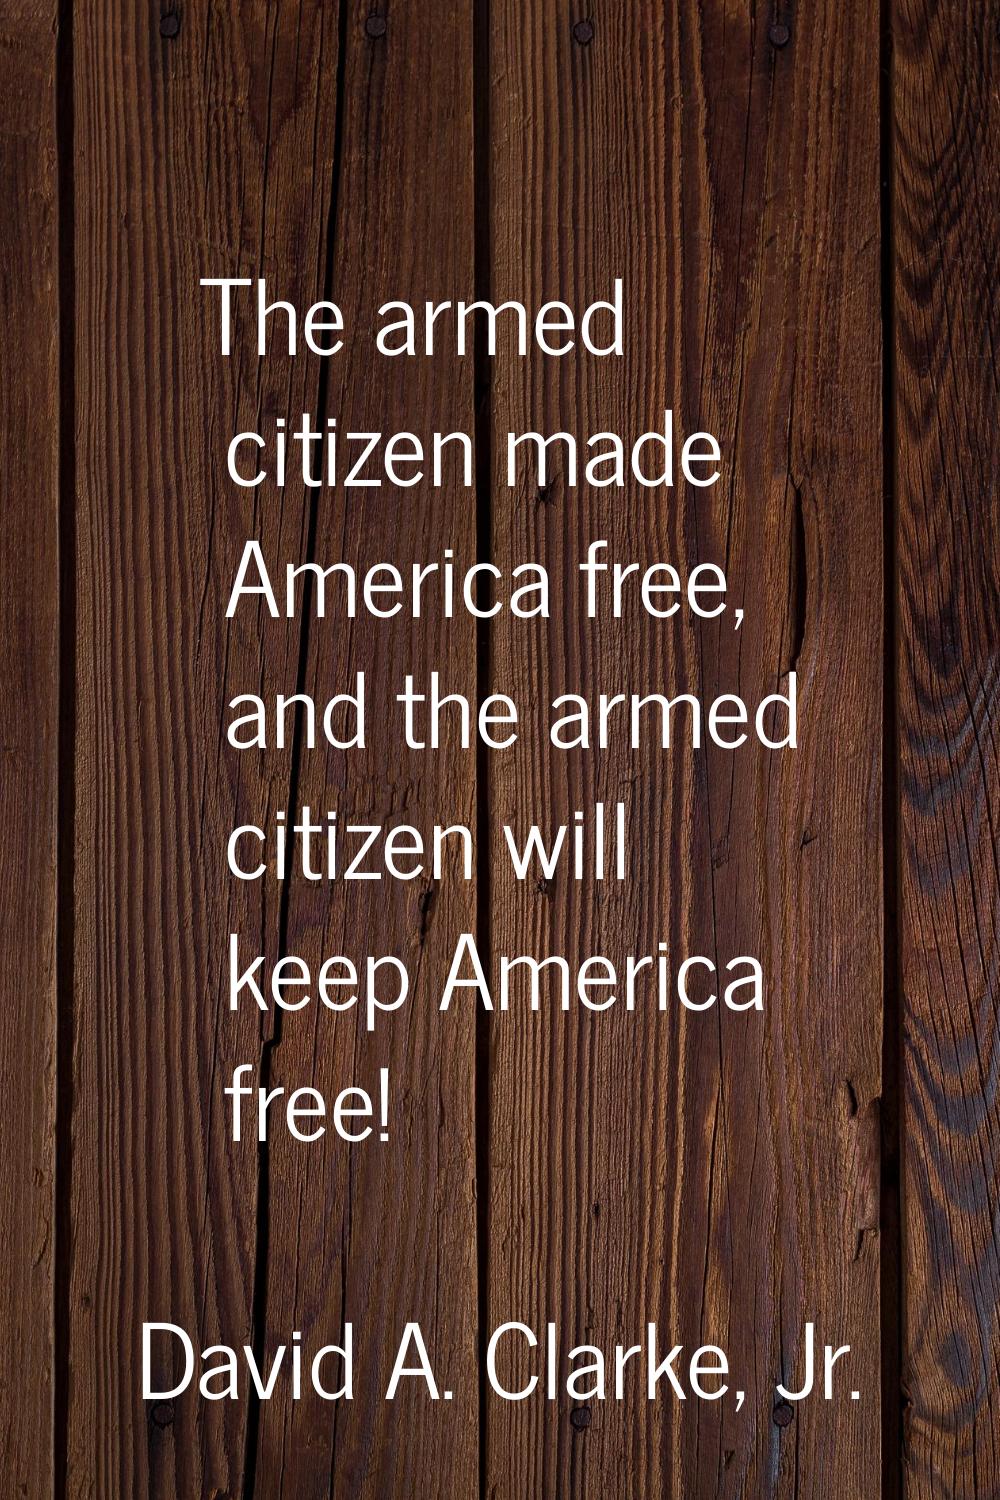 The armed citizen made America free, and the armed citizen will keep America free!